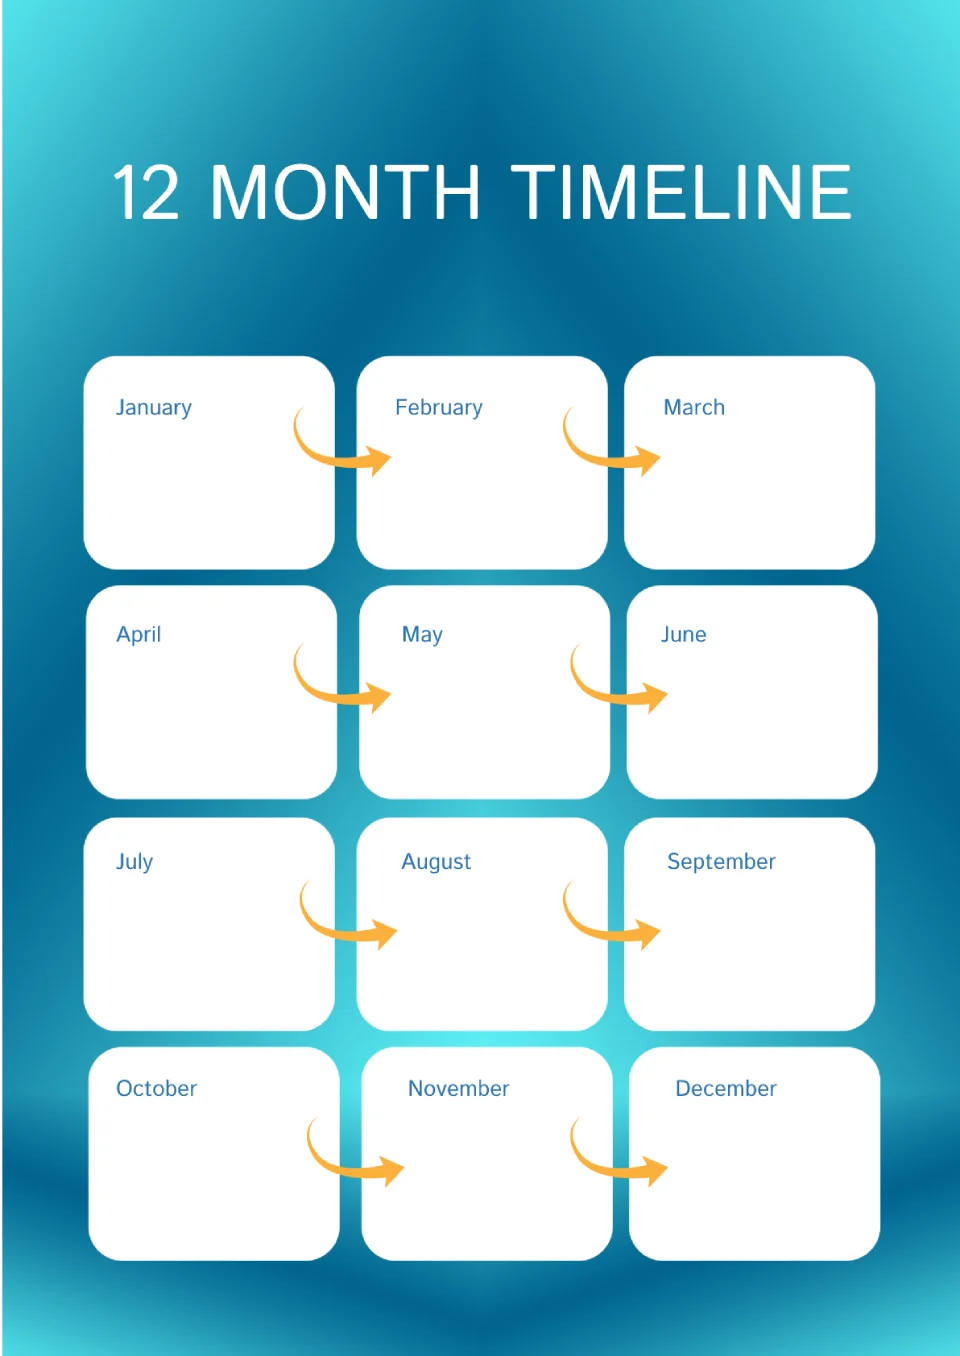 12 month Timeline Template